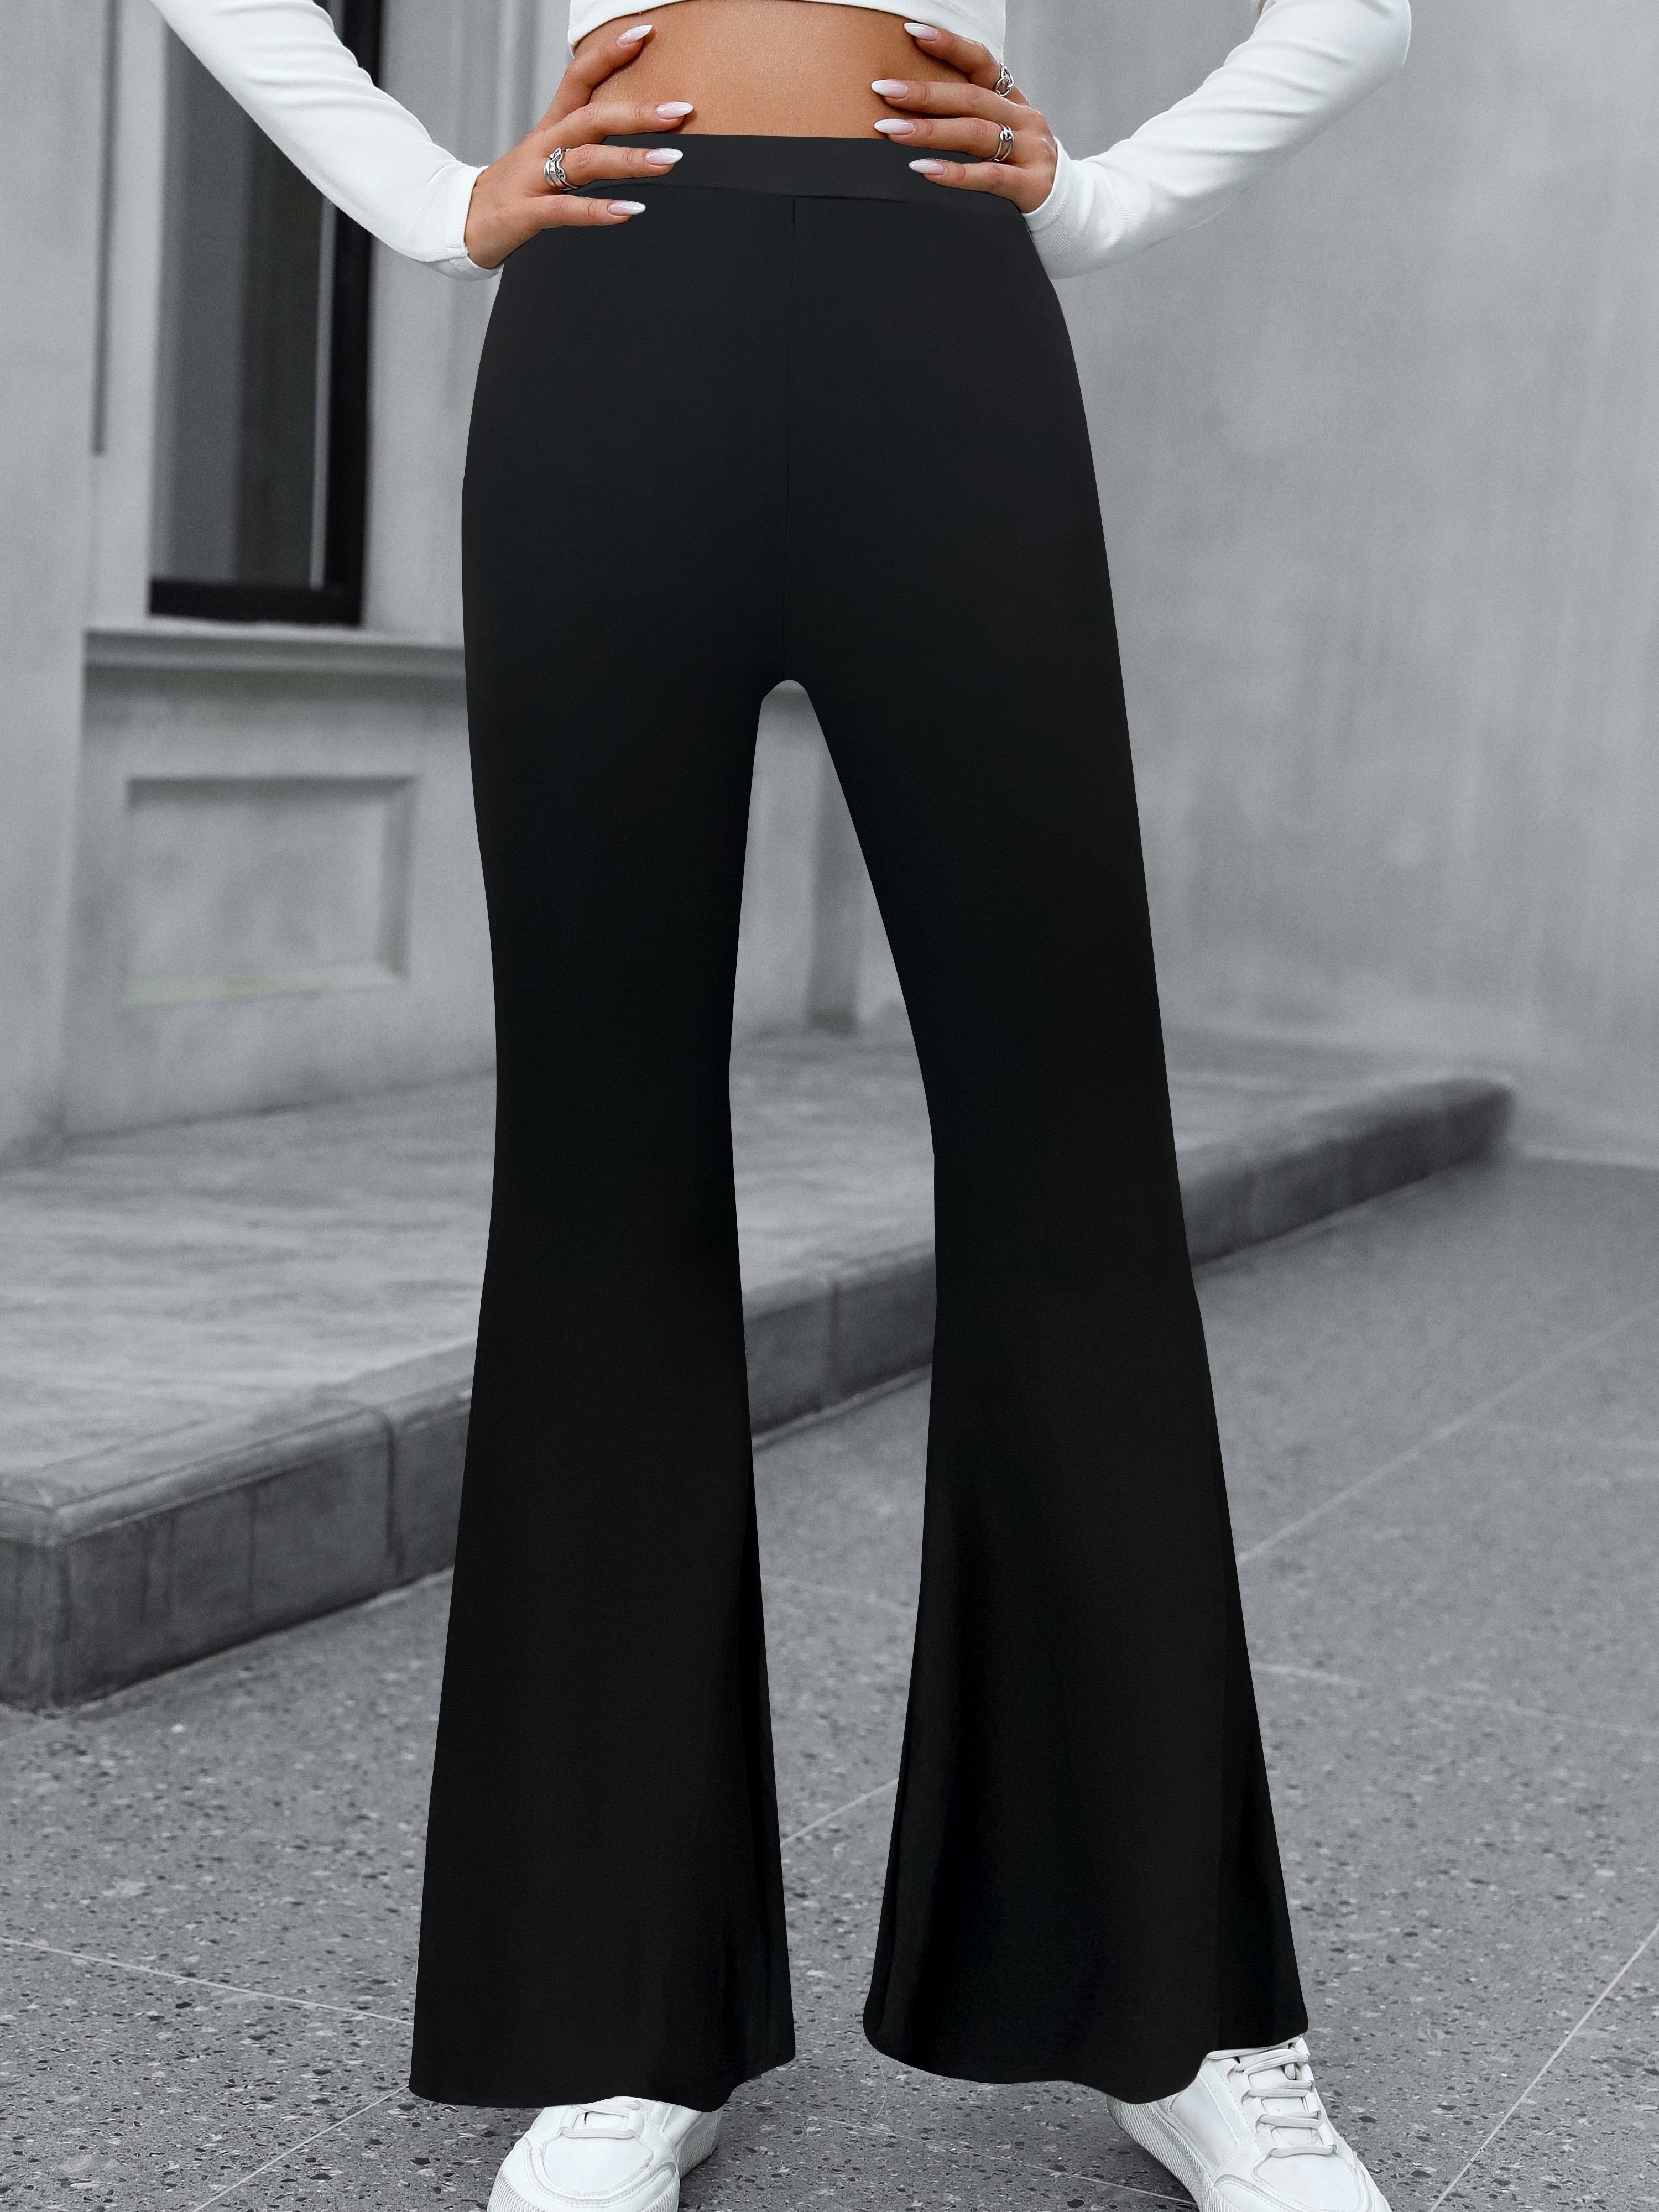 High Waist Formal & Casual Pants, Women's Fashion, Bottoms, Other